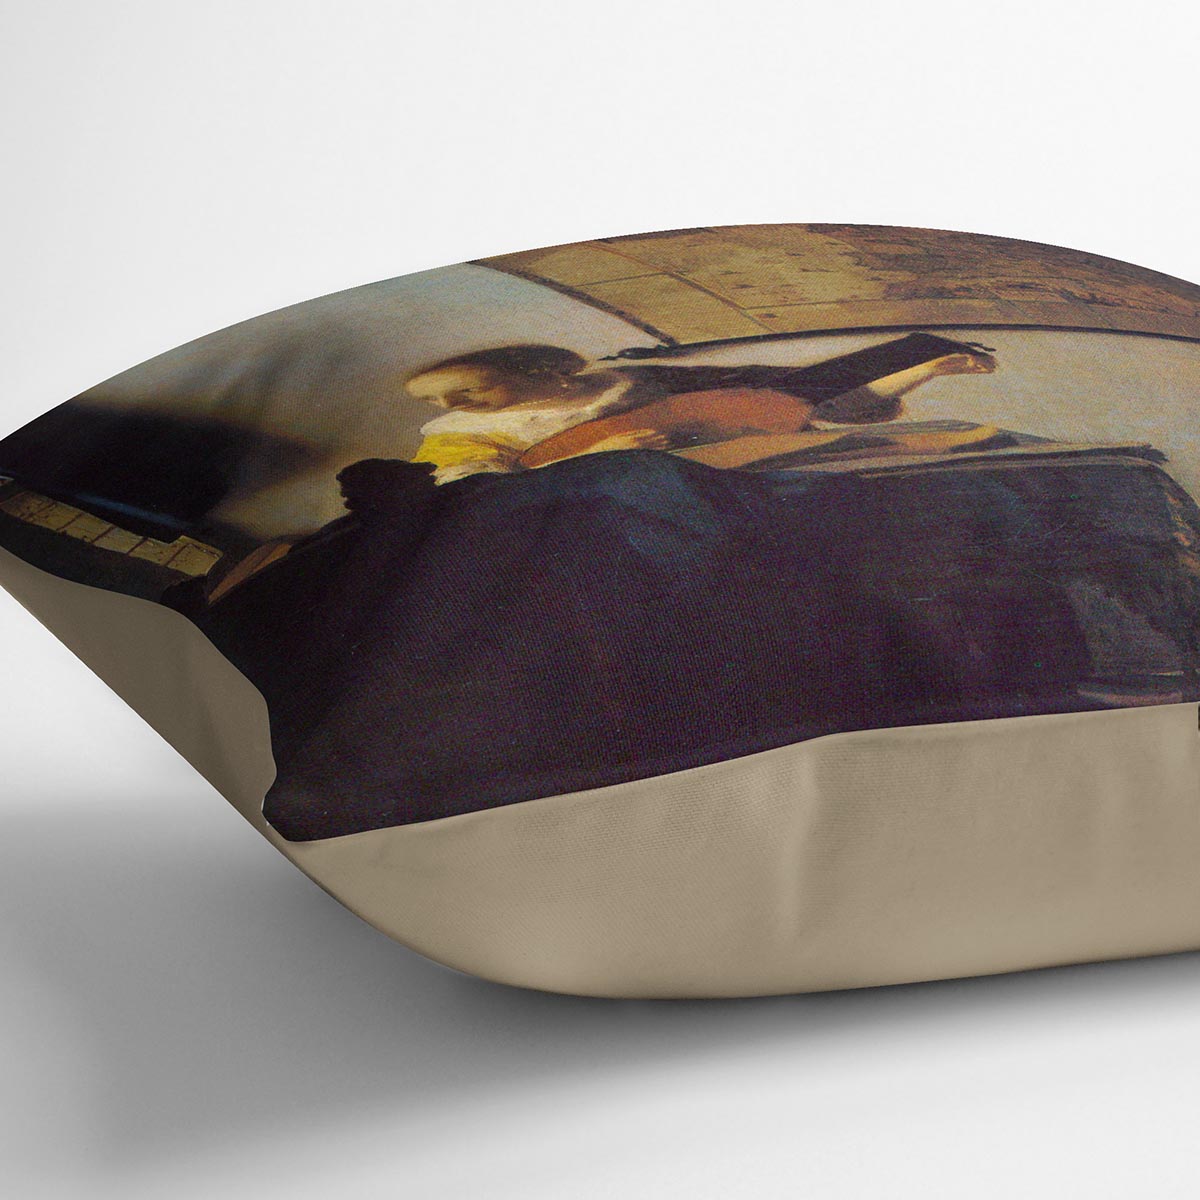 According to the player by Vermeer Cushion